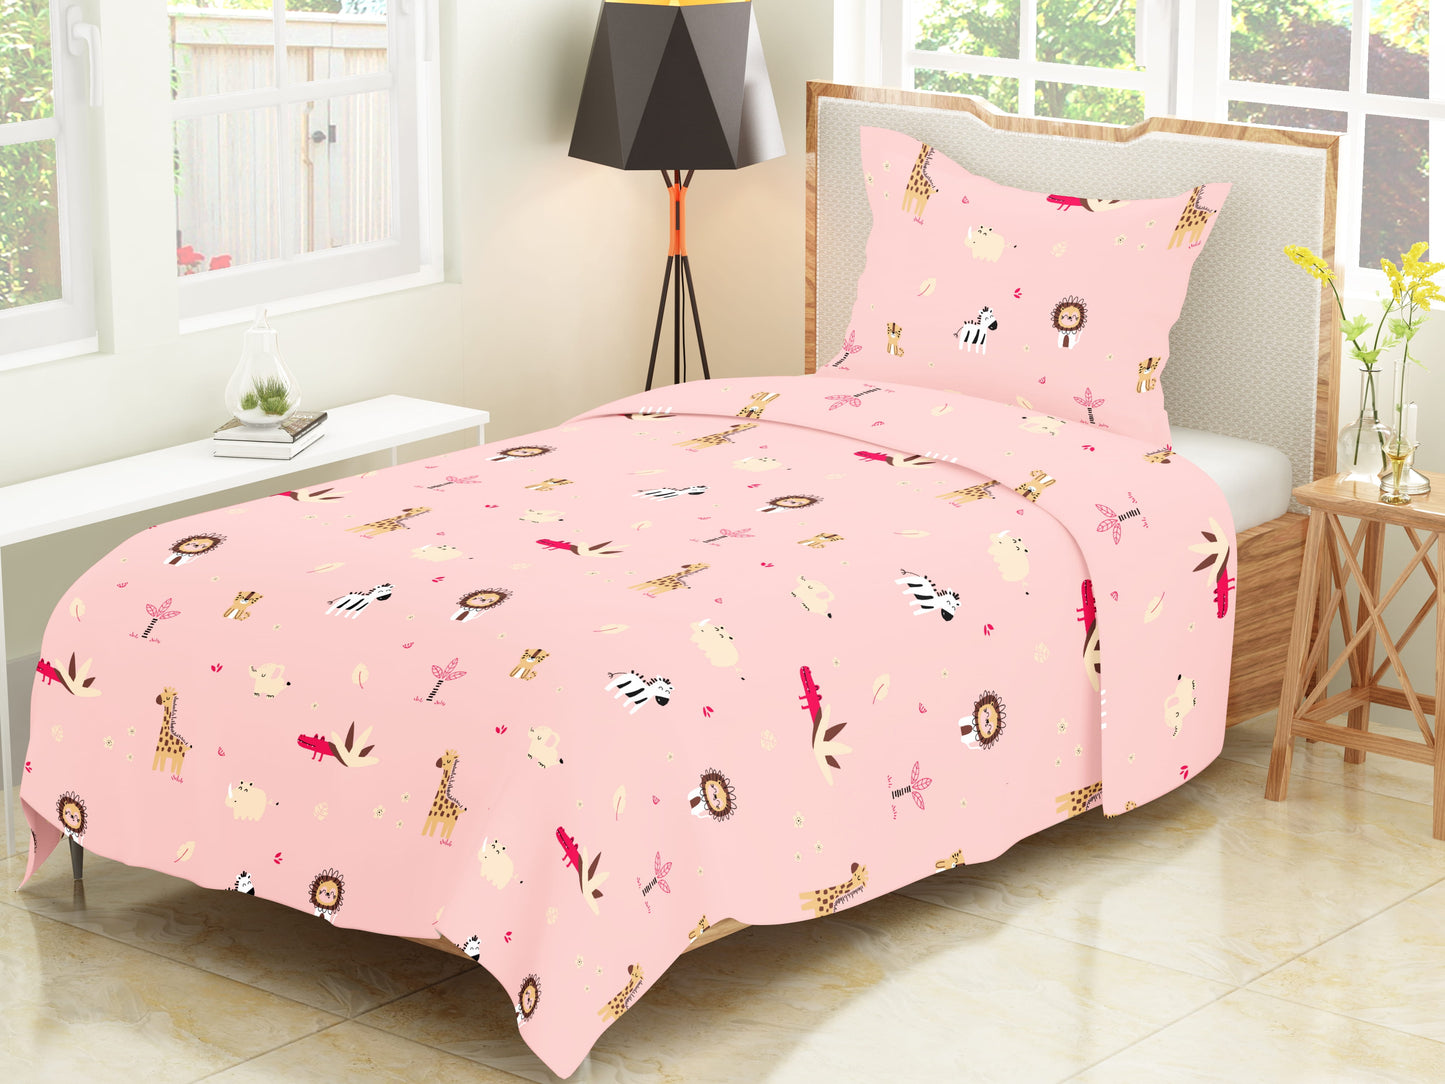 Discover the Excitement: Zoo Animals Themed Bedsheet for Kids